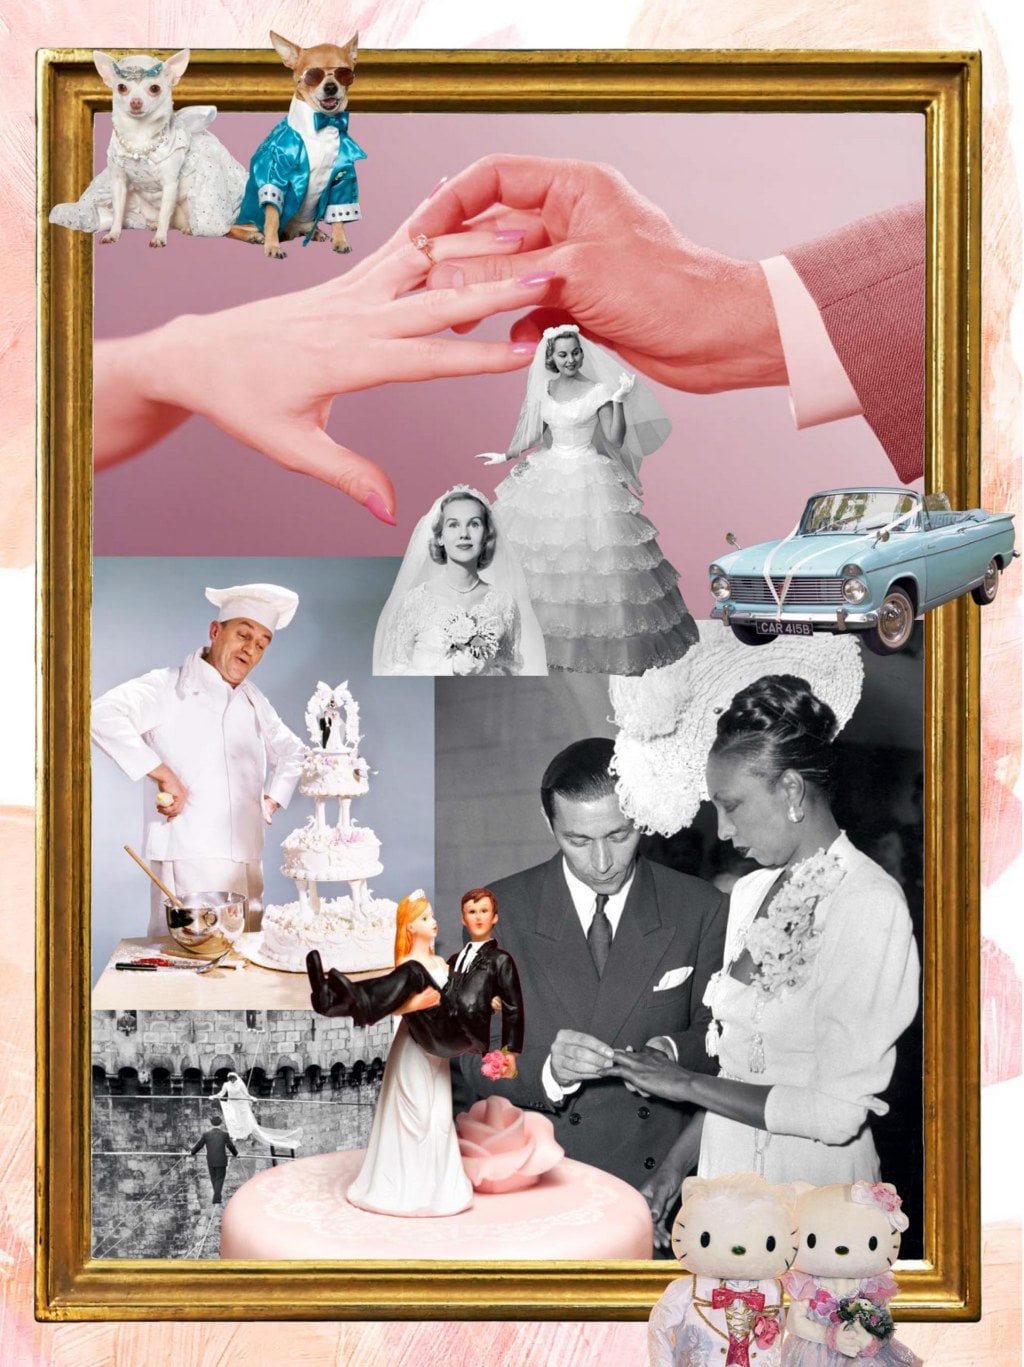 Montage of weddings and brides